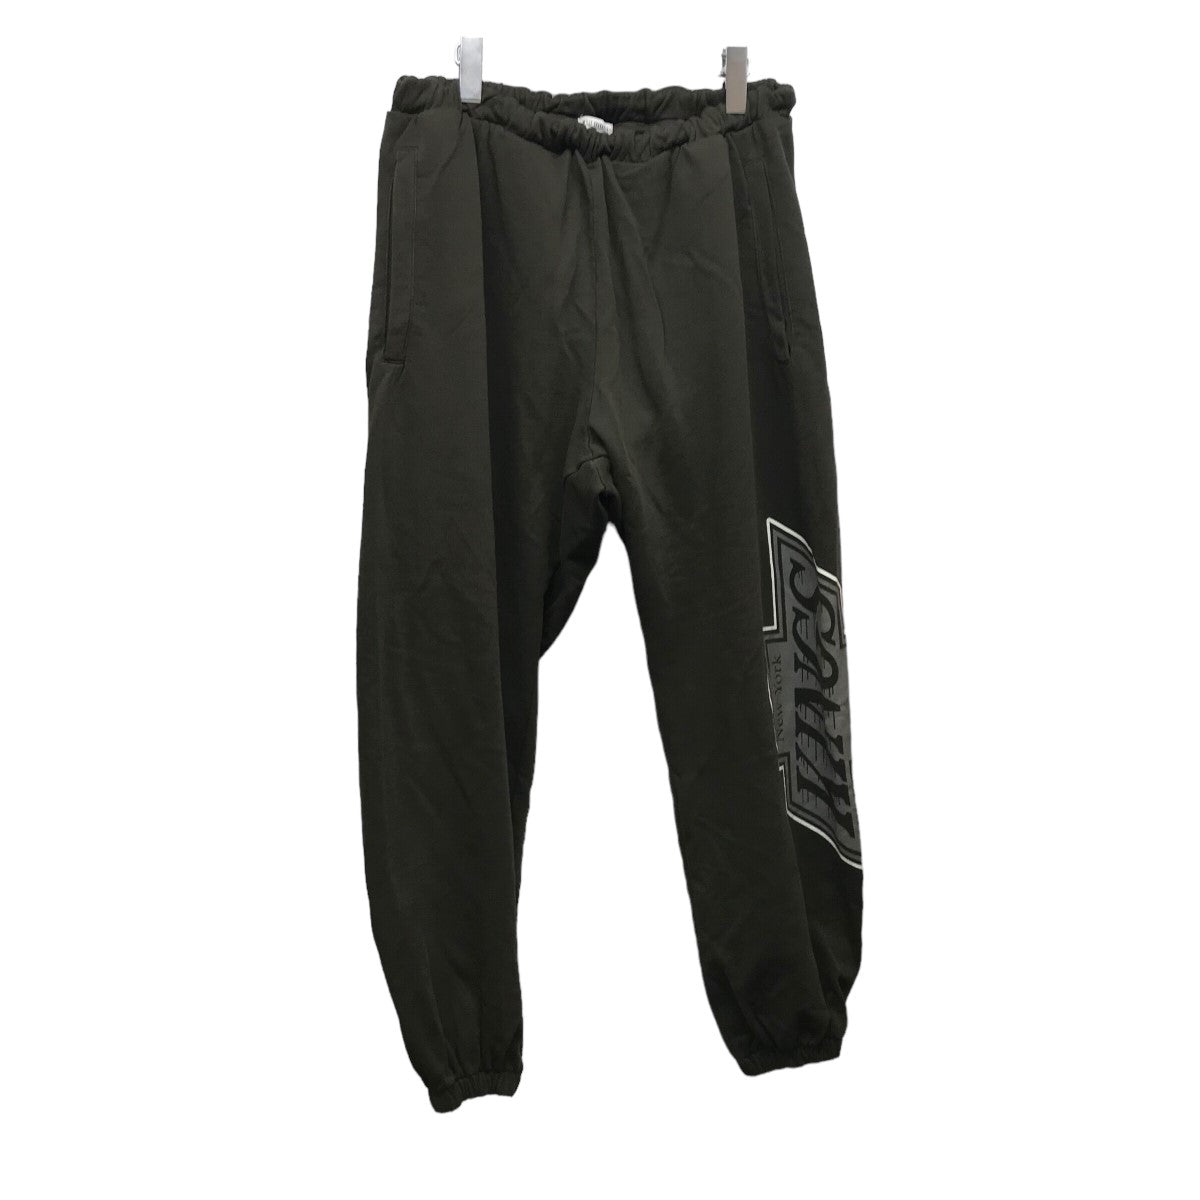 WILLY CHAVARRIA(ウィリーチャバリア) 21AW 「BIG WILLY SWEATPANT 